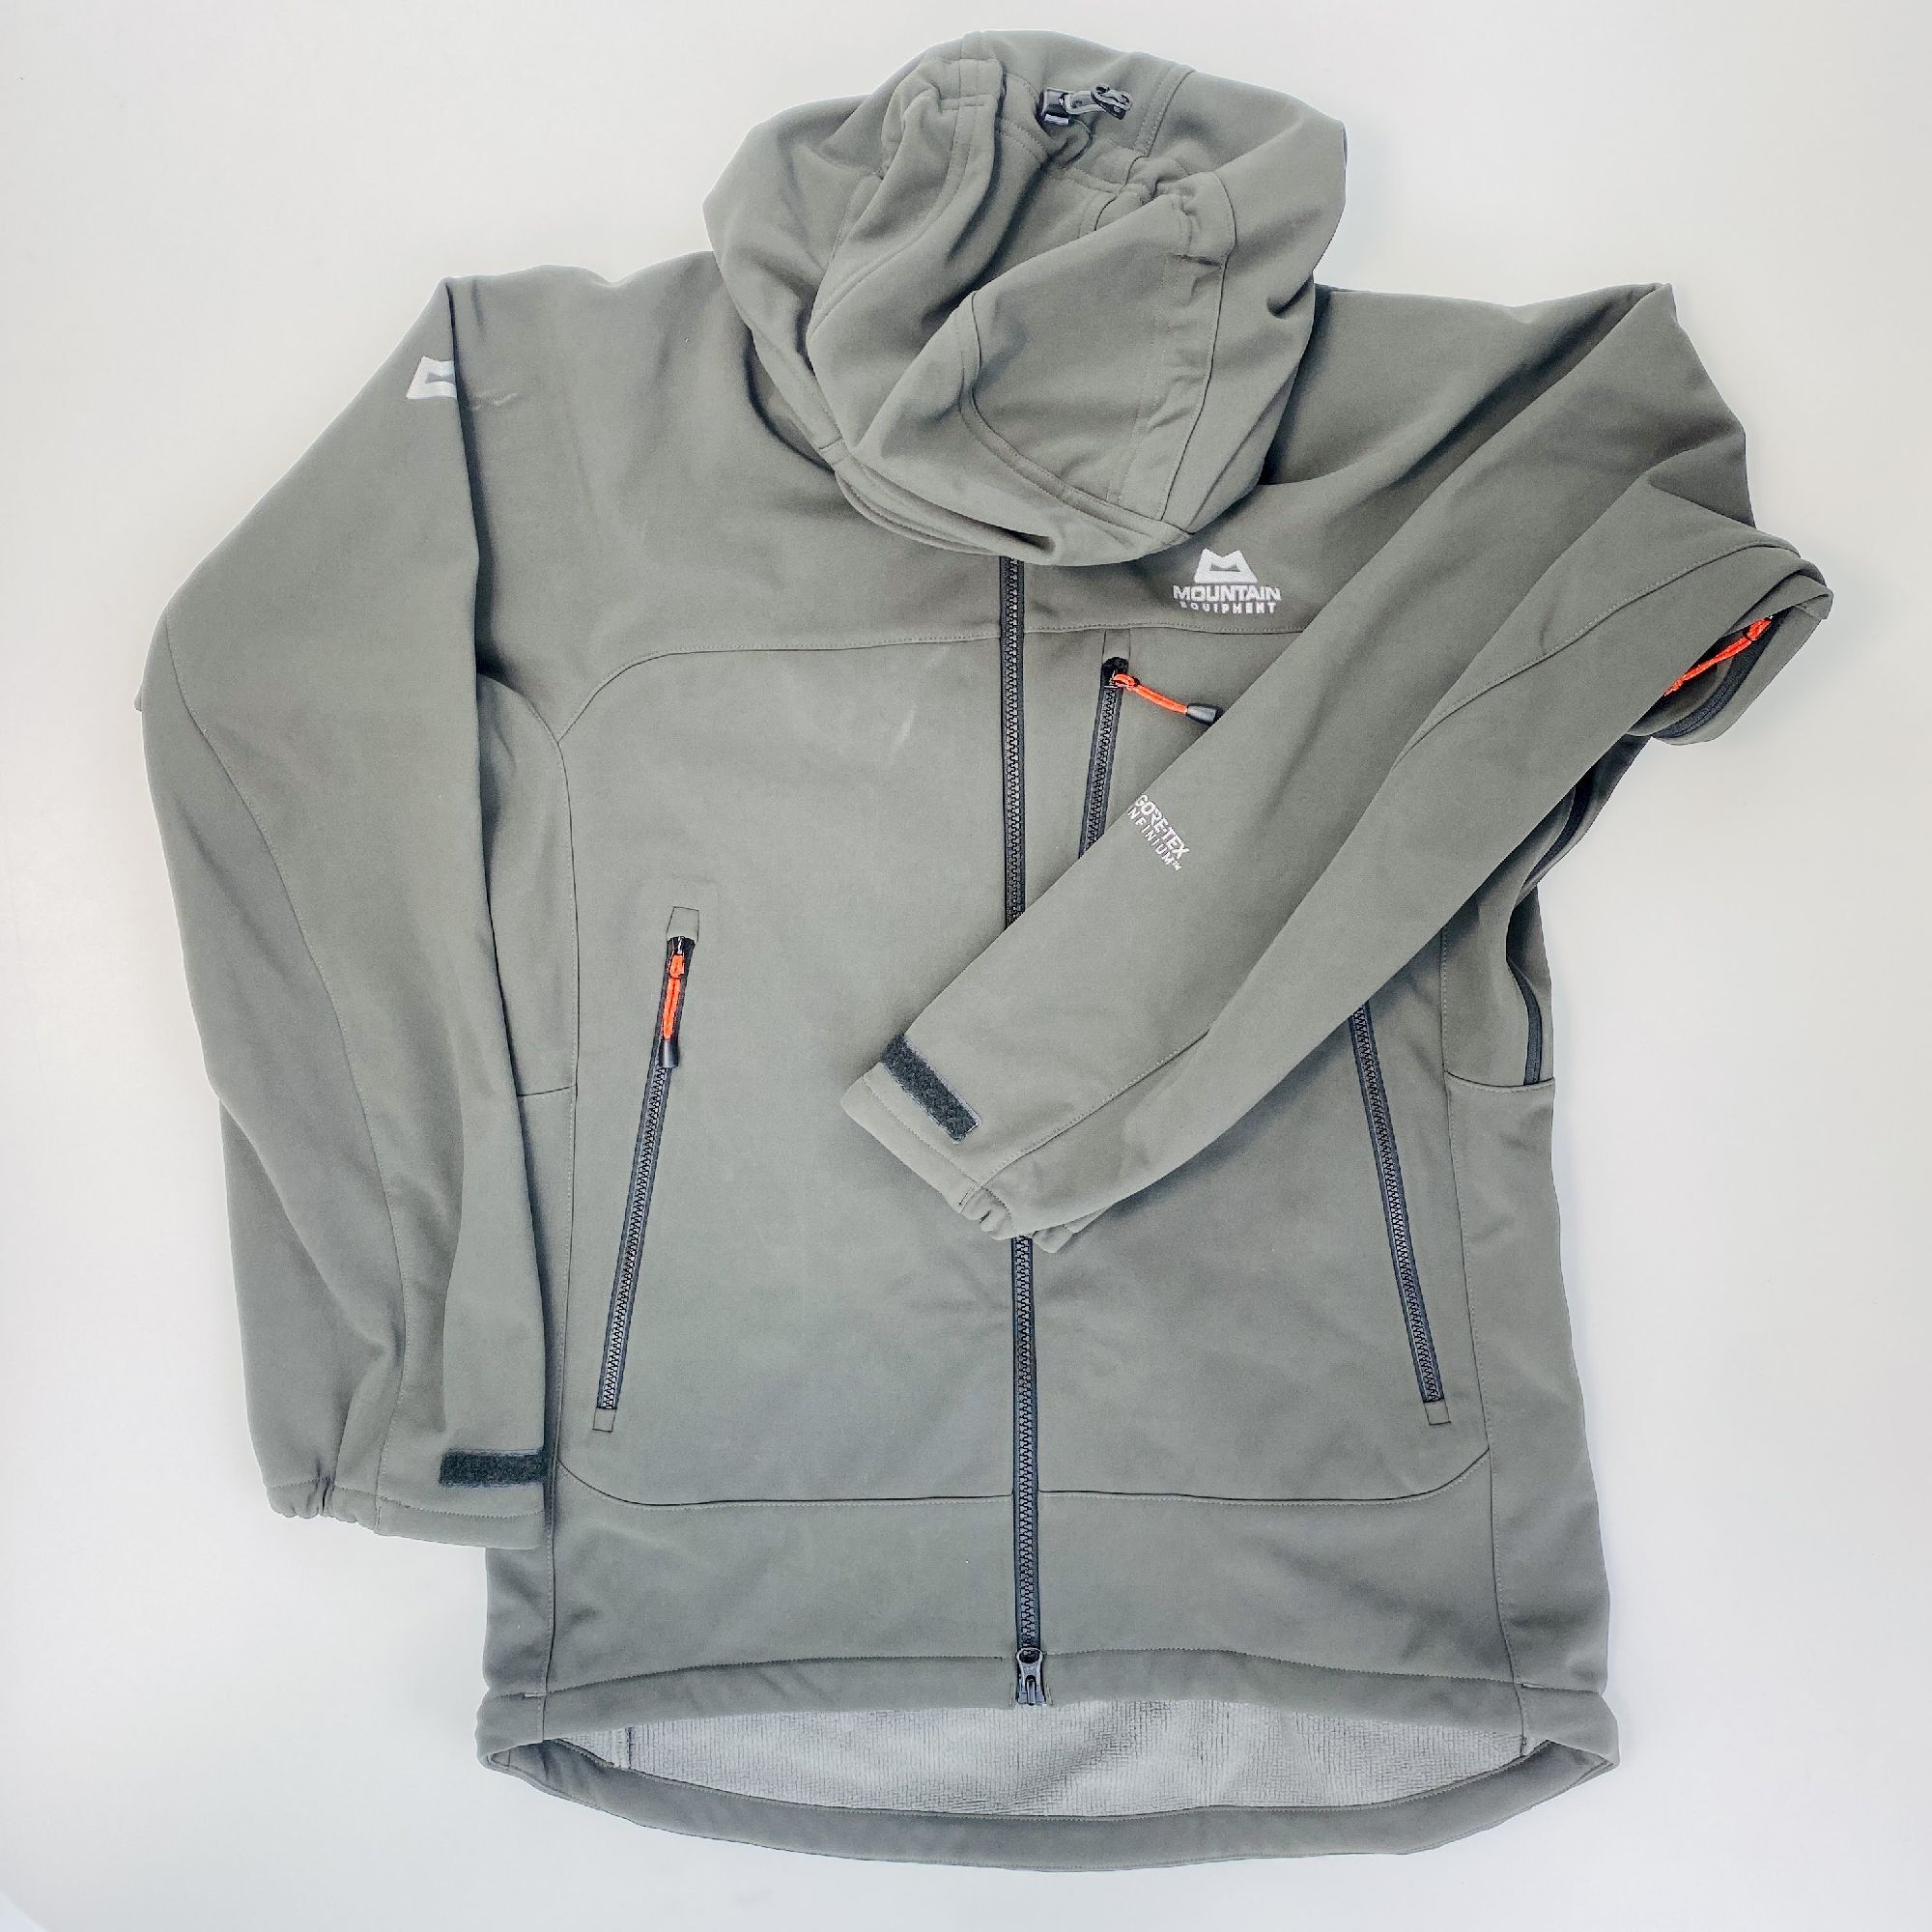 Mountain Equipment Vulcan Jacket - Seconde main Polaire homme - Gris - M | Hardloop